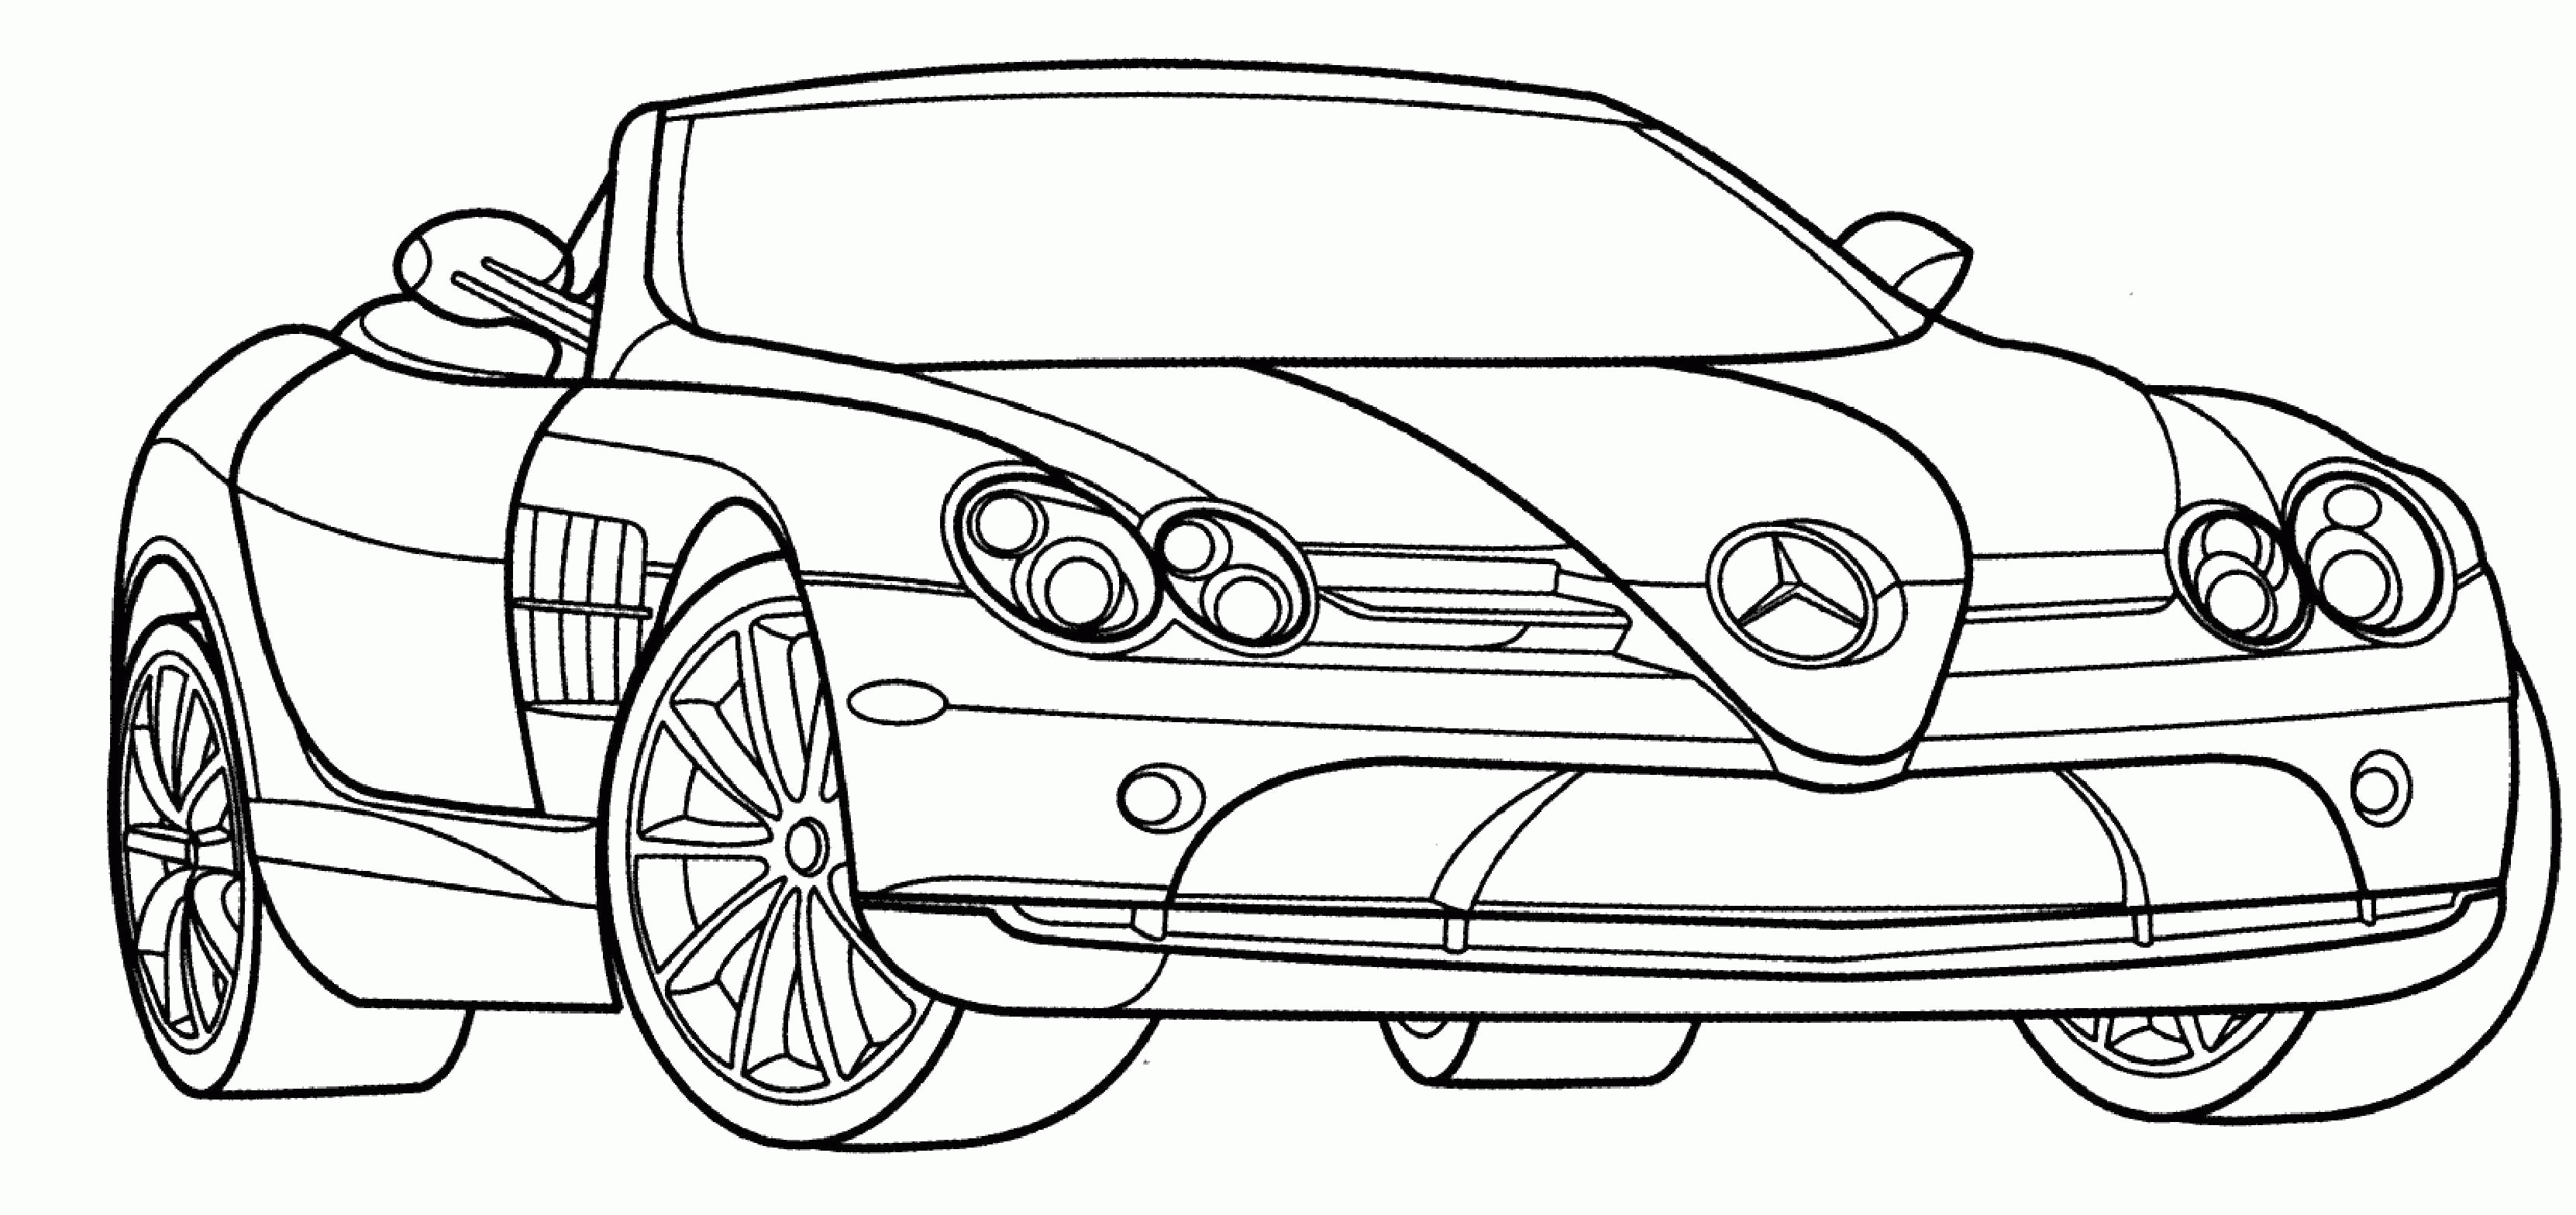 Cars Coloring Pages Pdf - Coloring Home